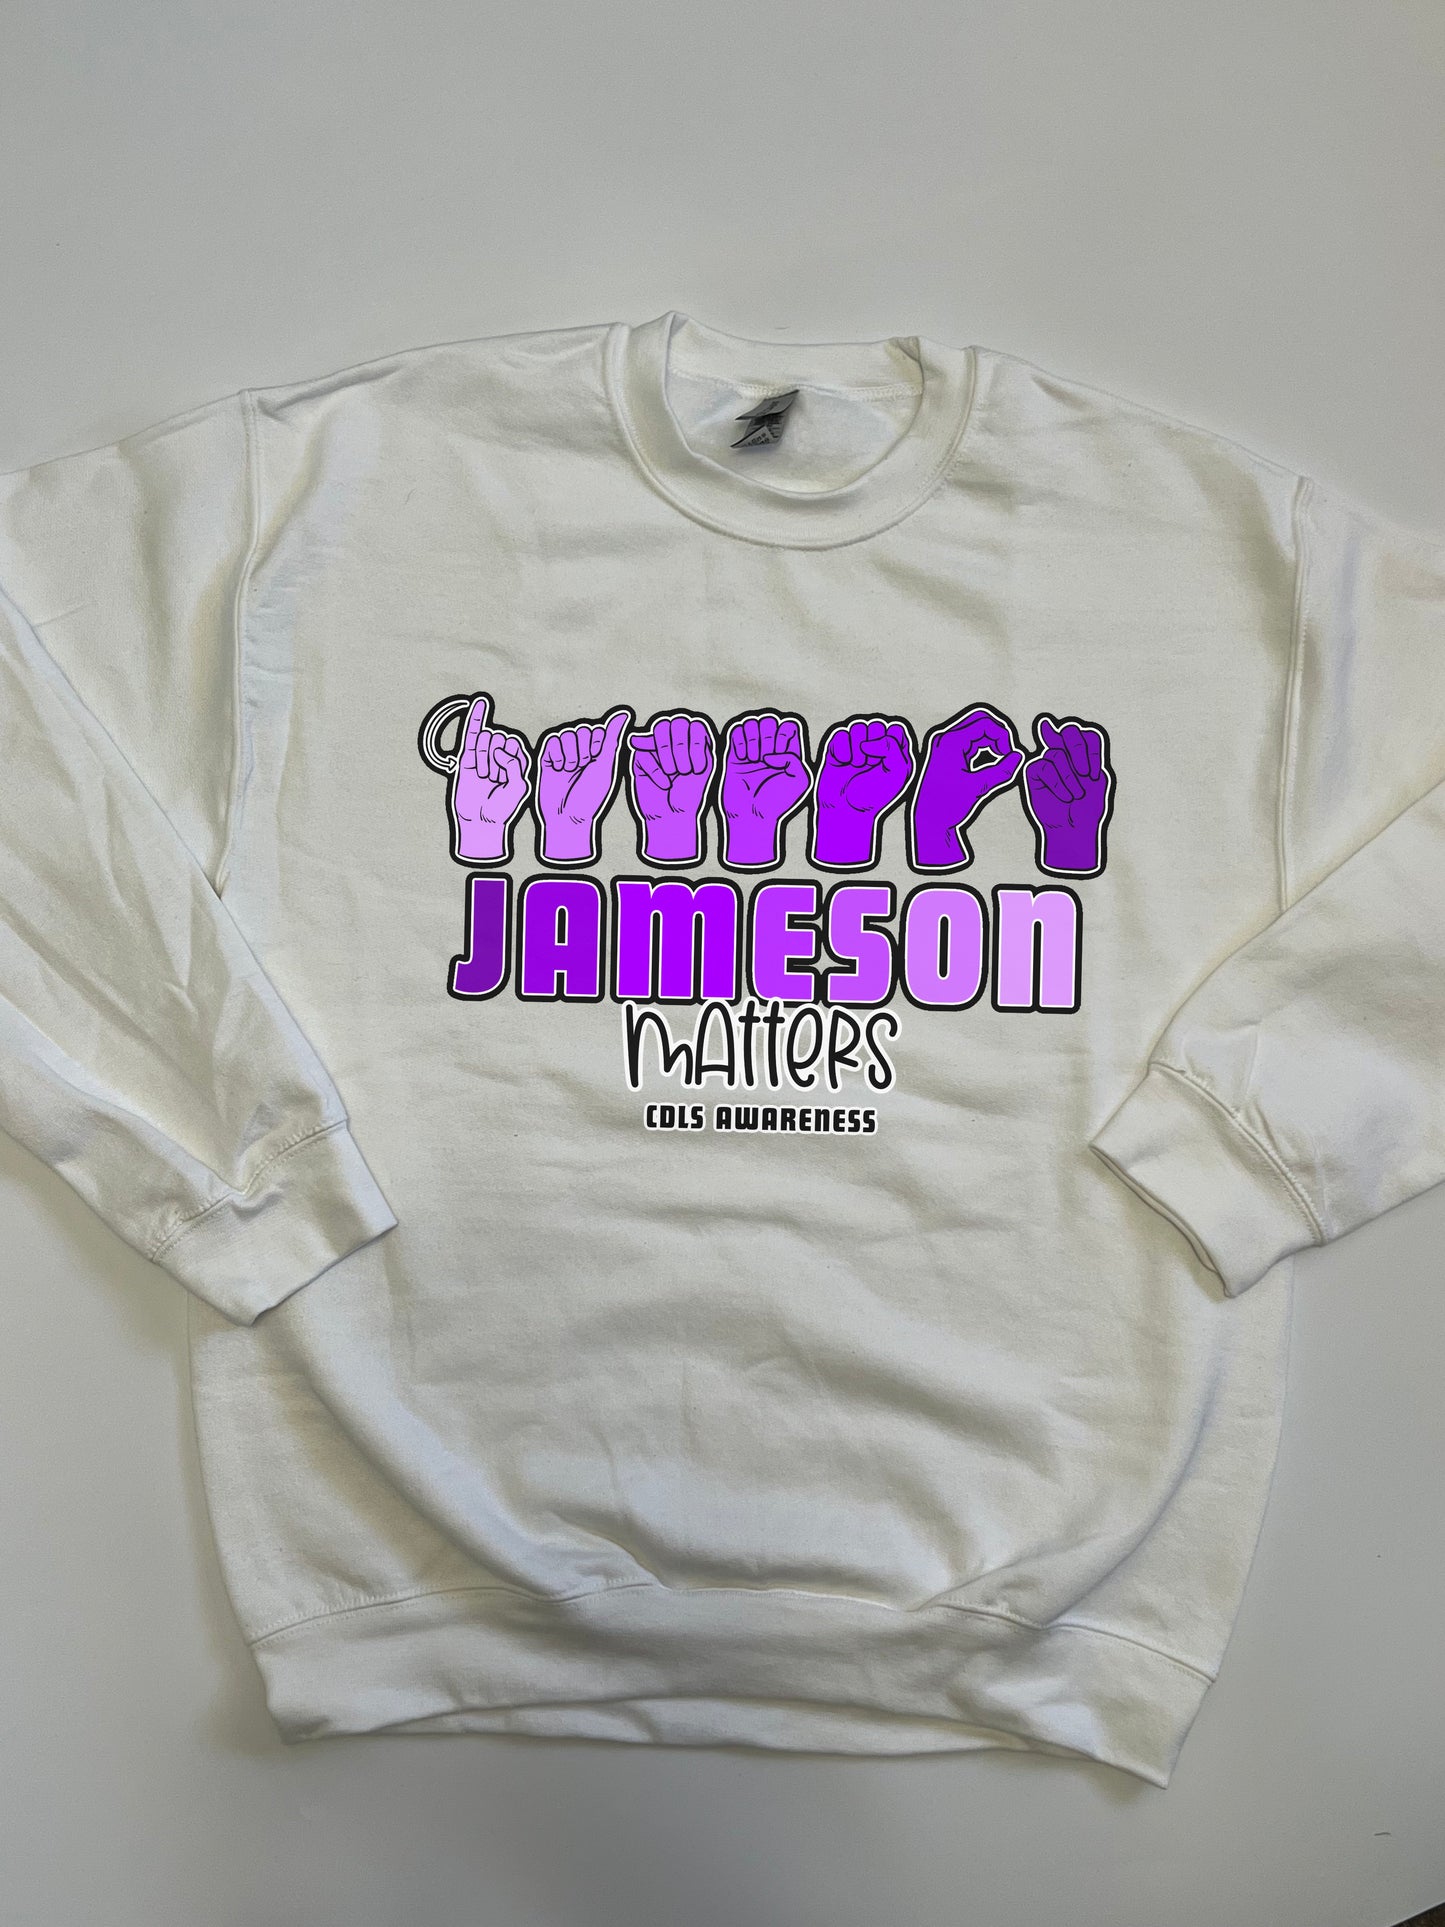 YOUTH. LONG SLEEVE TSHIRT. JAMESON MATTERS. PREORDER.